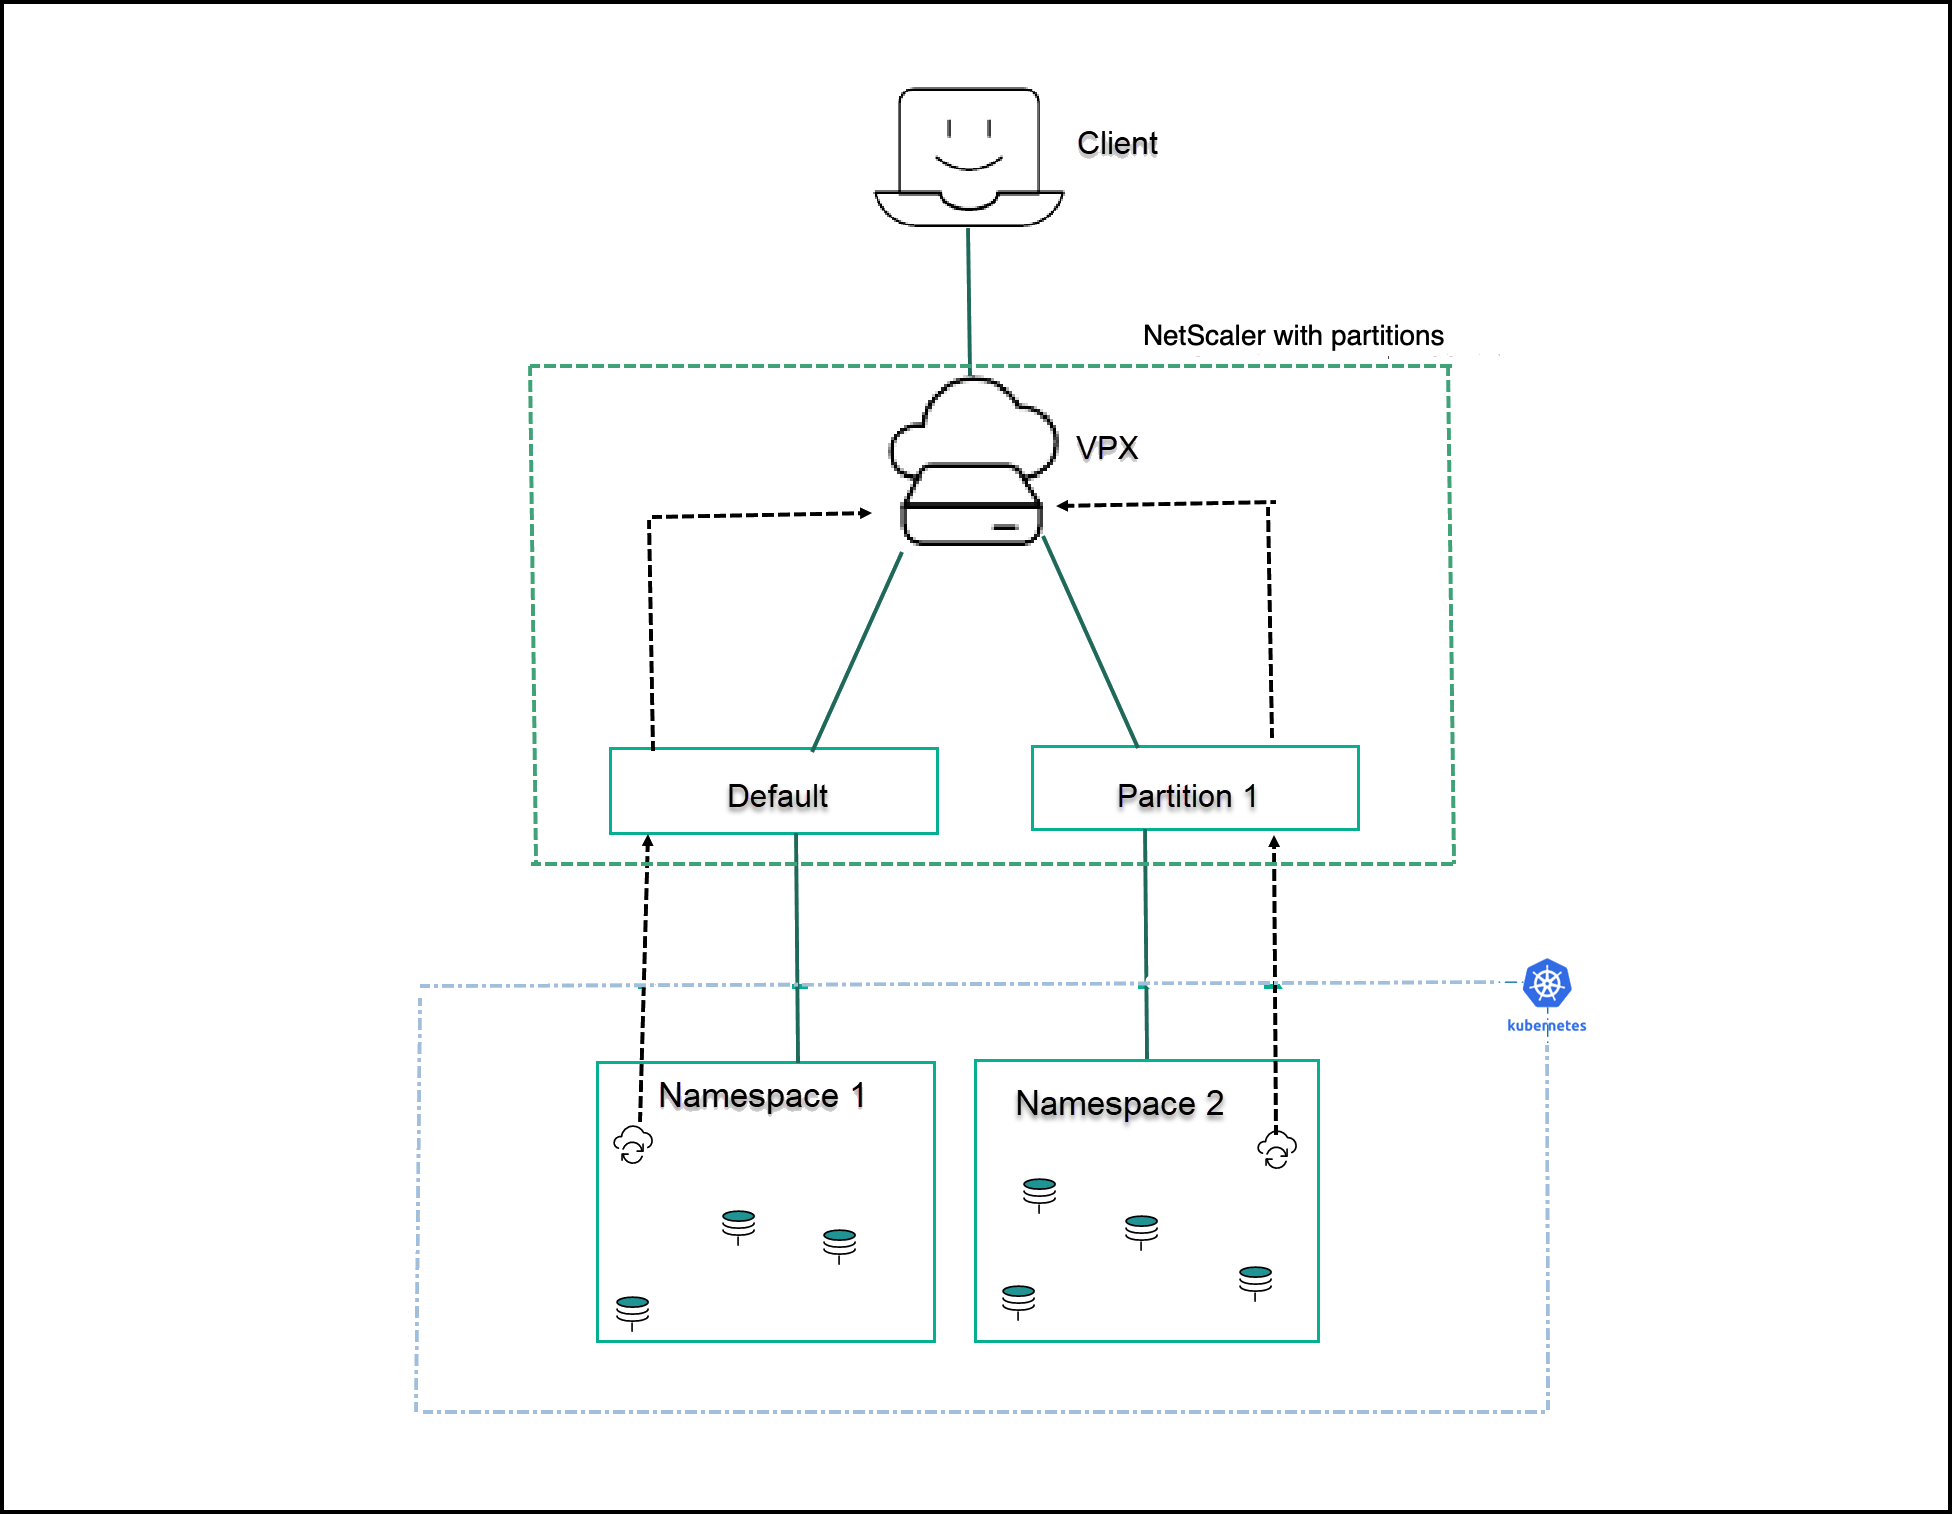 NetScaler managing Kubernetes cluster workload using admin partitions